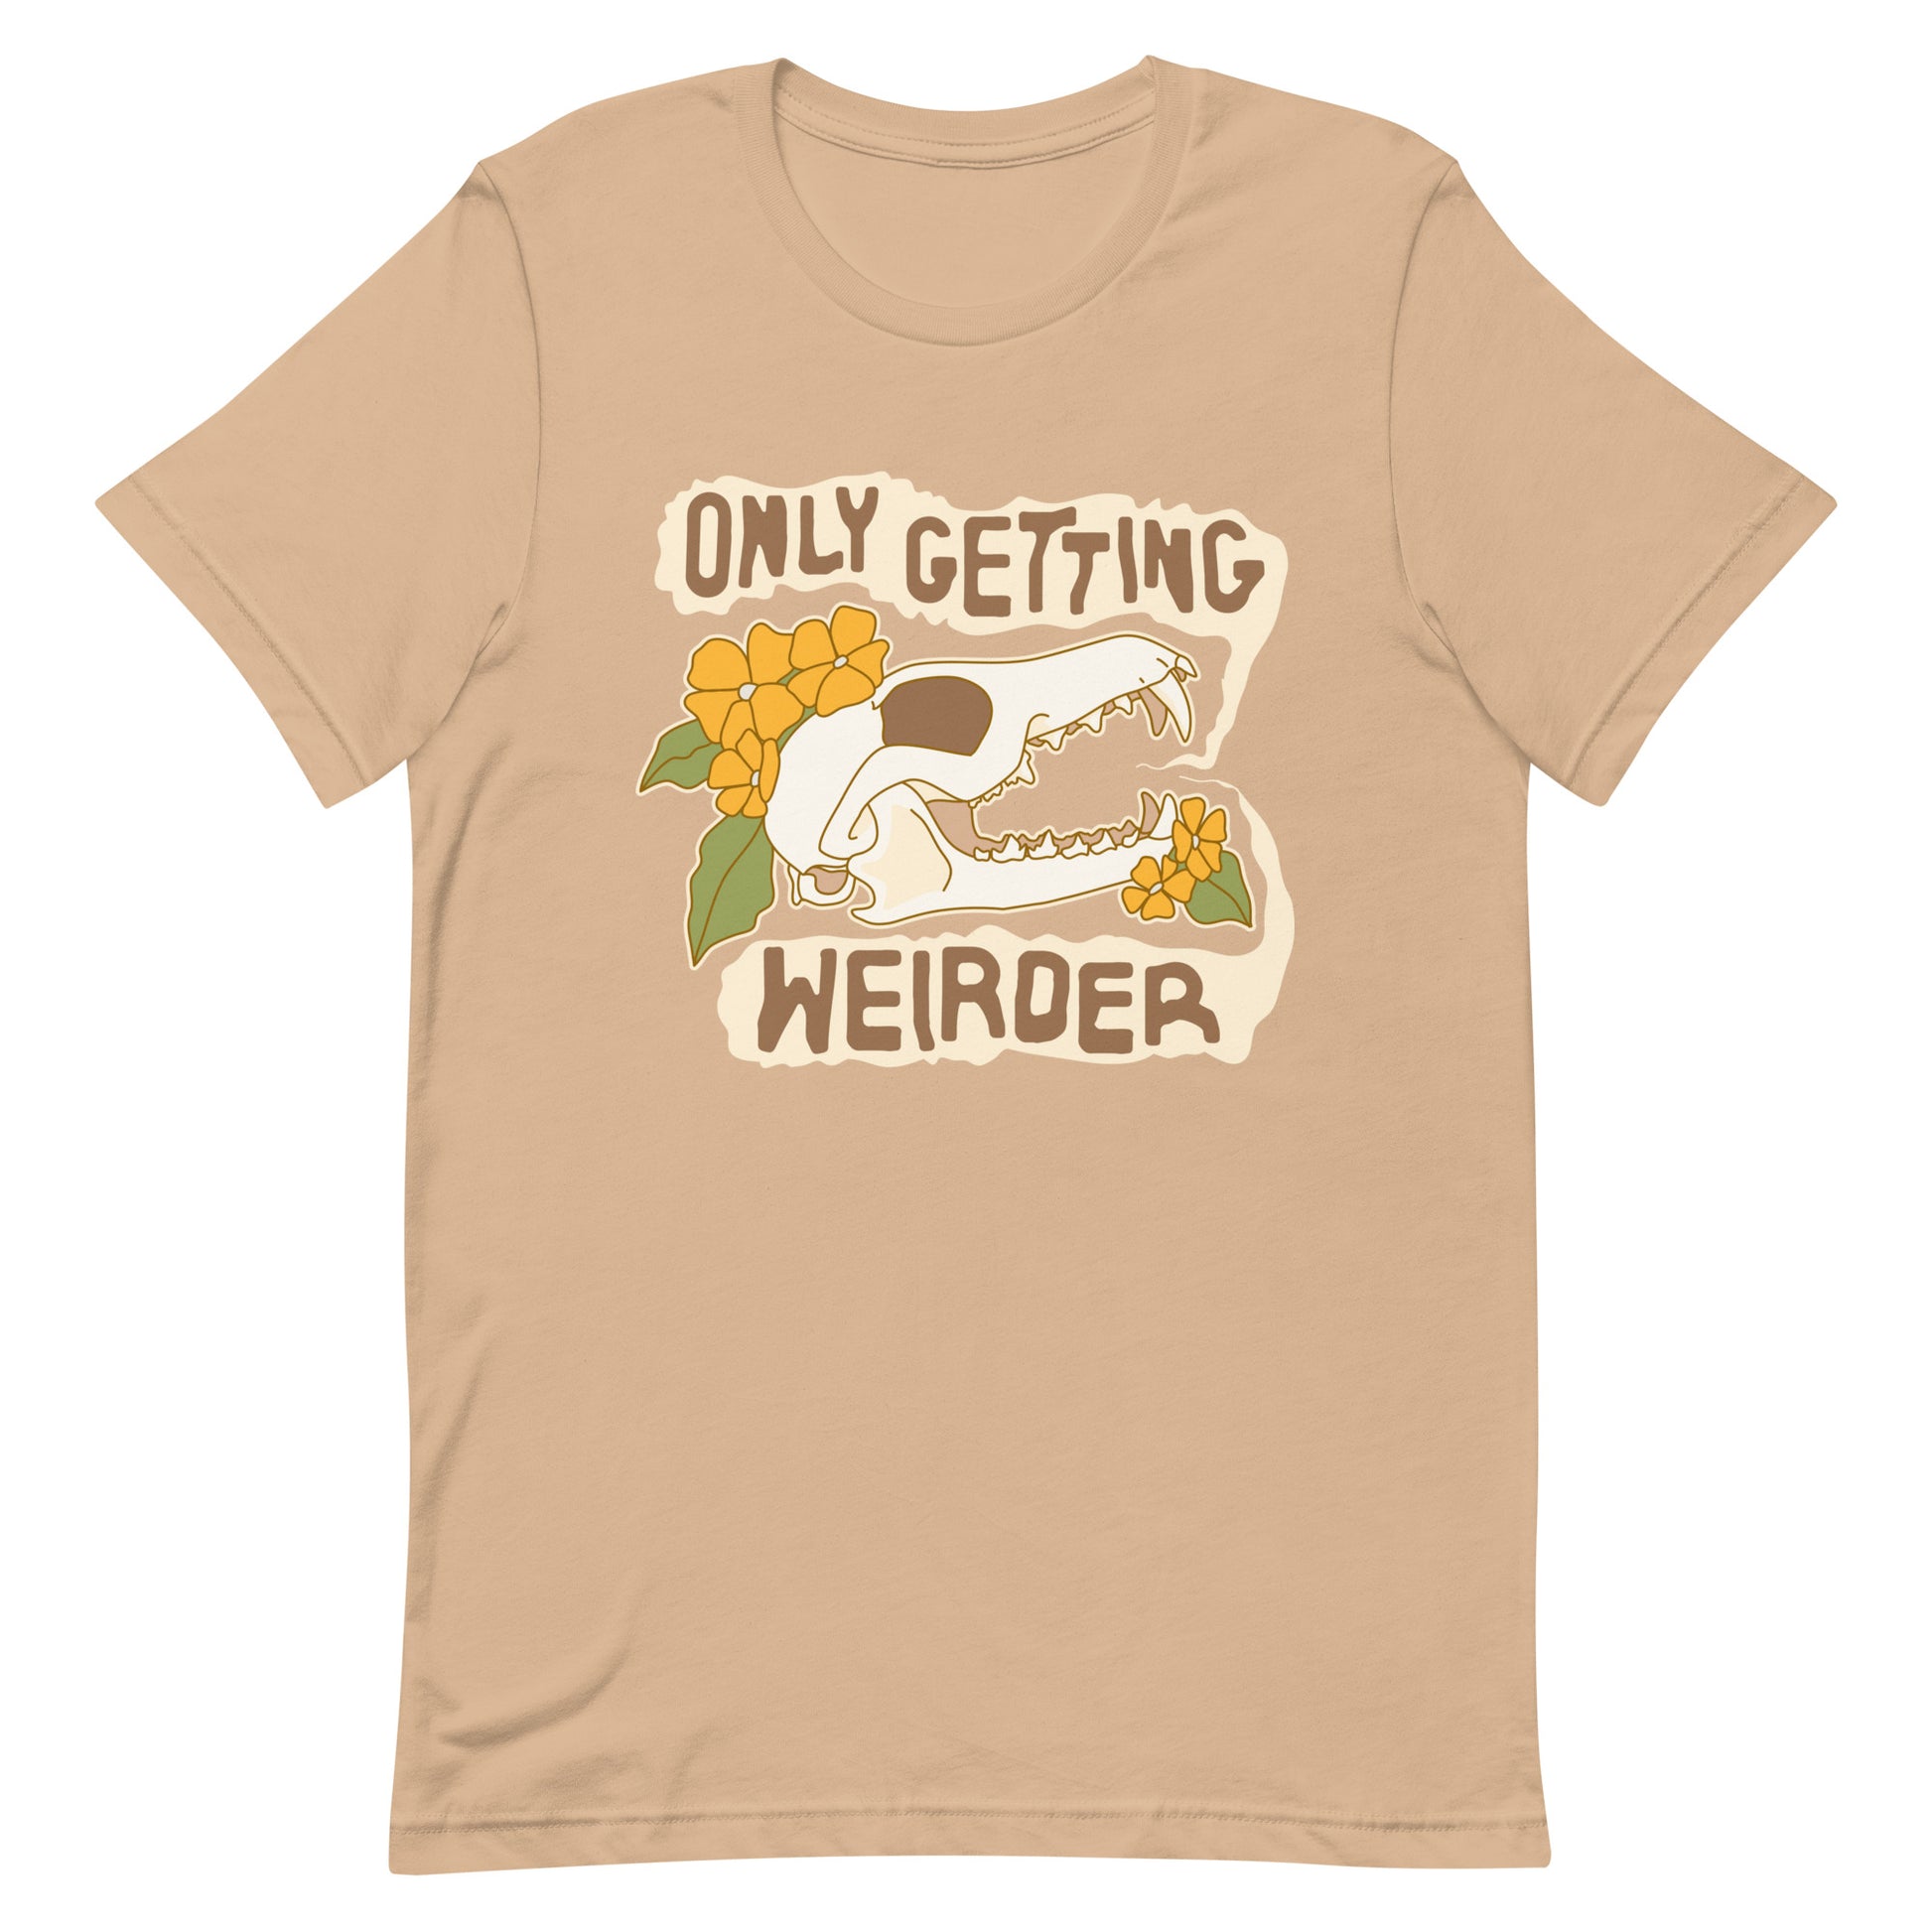 A tan t-shirt featuirng an illustration of a fox skull surrounded by yellow flowers. Wobbly speech bubbles are coming from the fox's mouth. Text inside the bubbles reads "ONLY GETTING WEIRDER'.